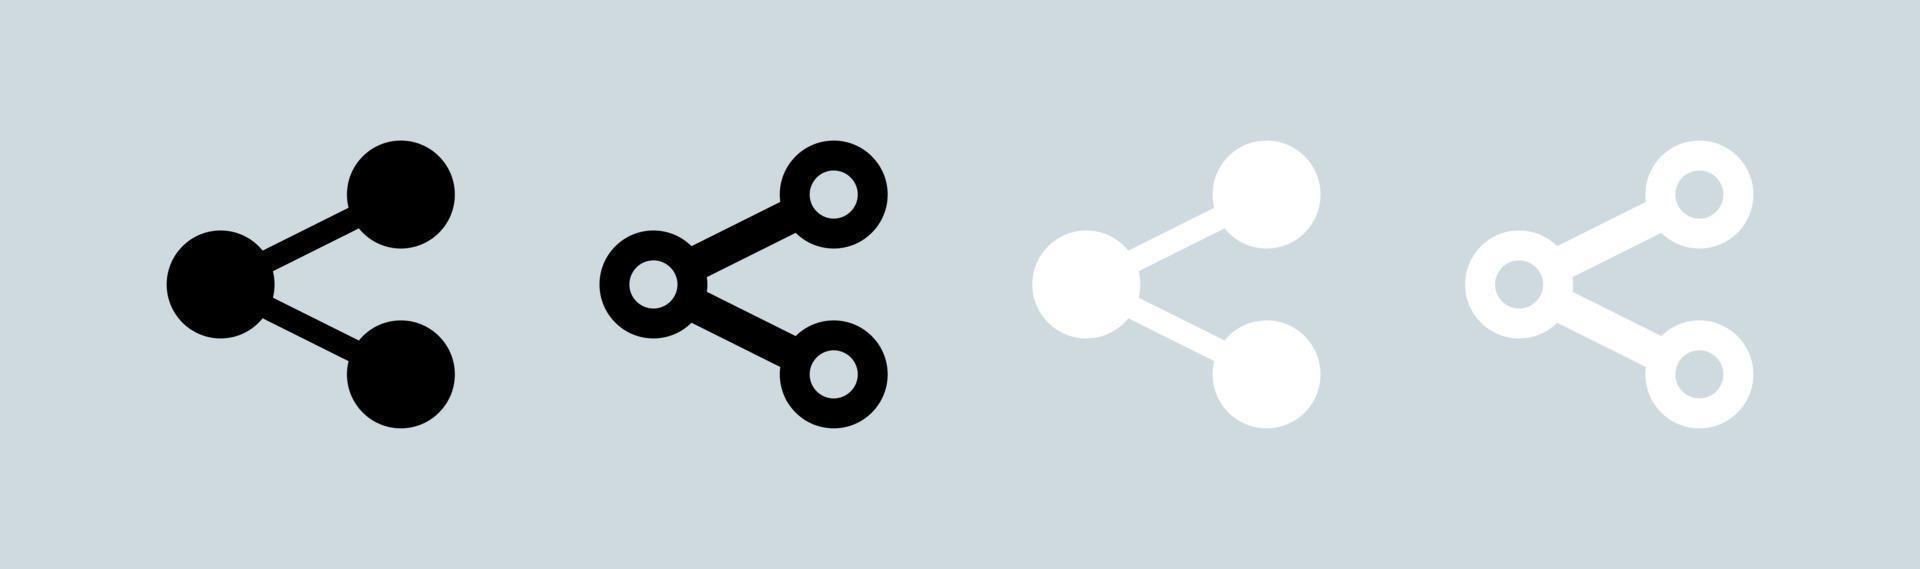 Share icons set in black and white colors. Connect, data sharing, link symbol, network share, share icon button set. vector